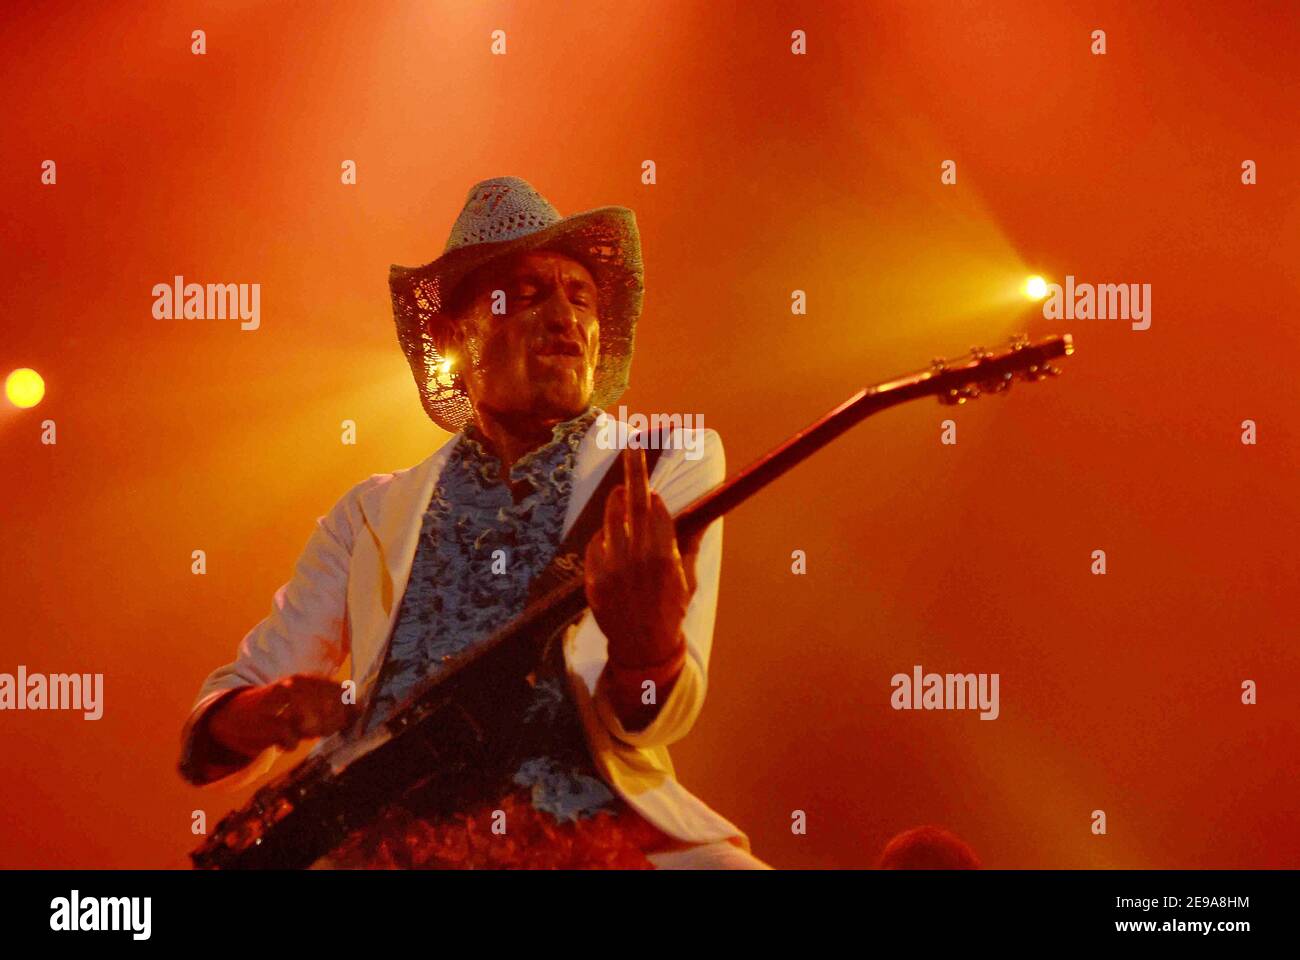 French rock band 'Les Wampas' performs live on stage at Le Zenith, in Paris, France, on May 11, 2006. Photo by Bruno Klein/ABACAPRESS.COM. Stock Photo